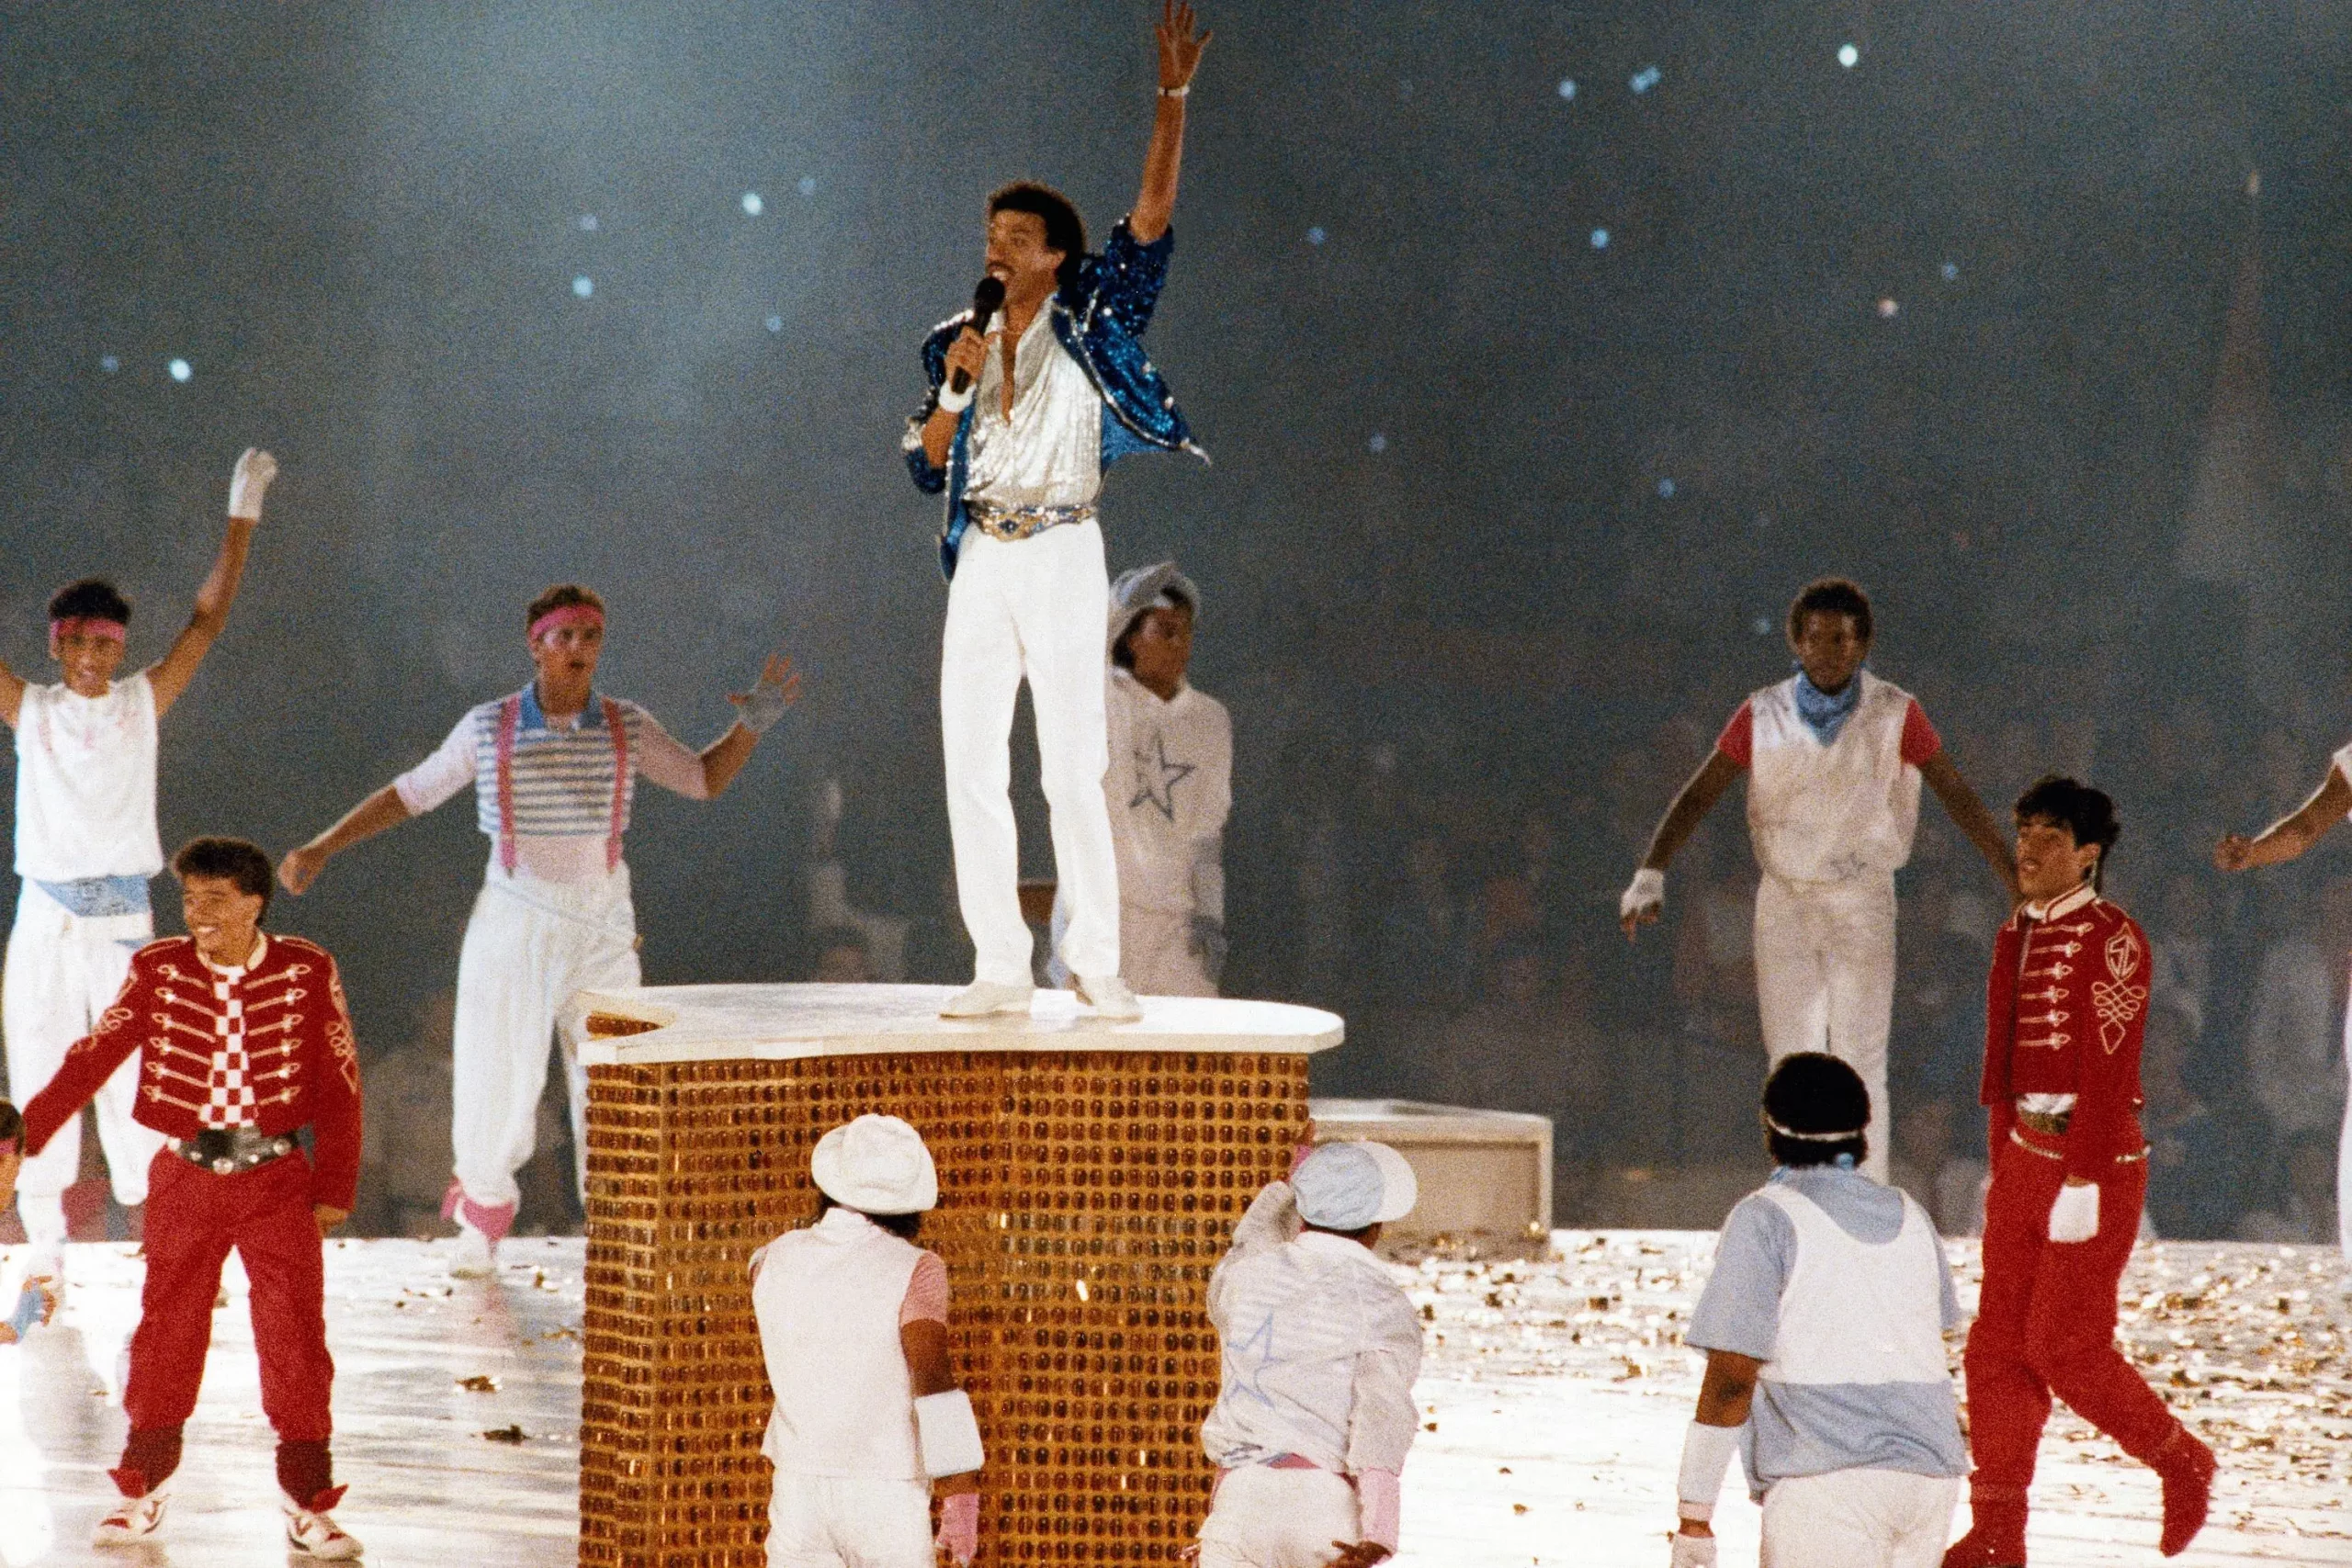 Lionel Richie at 1984 Olympics Los Angeles